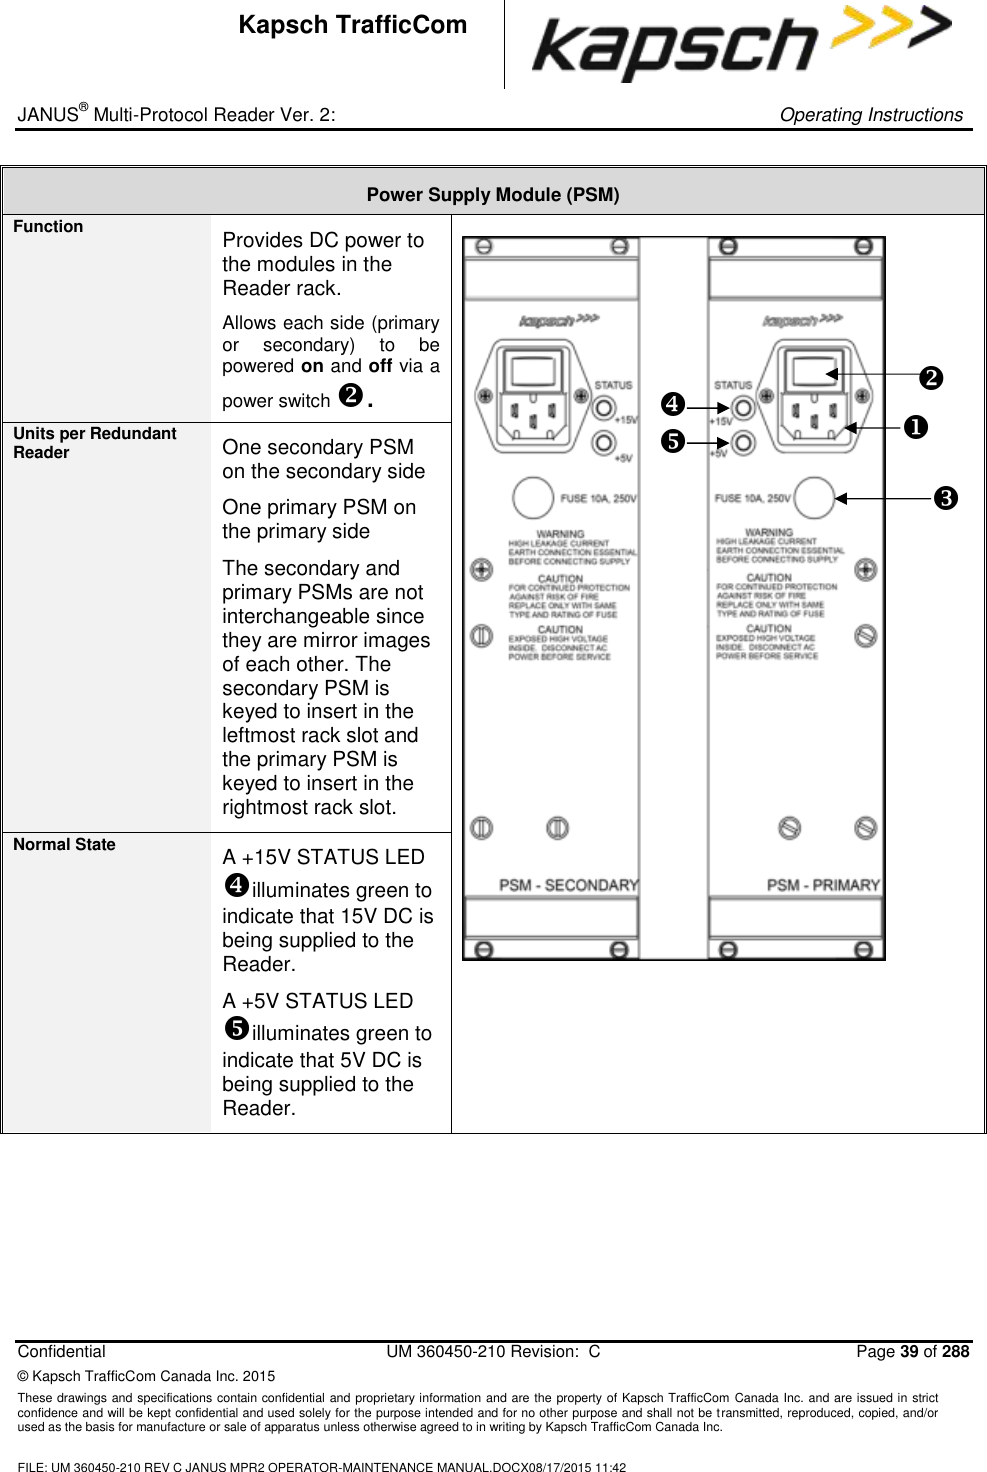 _ JANUS® Multi-Protocol Reader Ver. 2:     Operating Instructions  Confidential  UM 360450-210 Revision:  C  Page 39 of 288 © Kapsch TrafficCom Canada Inc. 2015 These drawings and specifications contain confidential and proprietary information and are the property of Kapsch TrafficCom Canada Inc. and are issued in strict confidence and will be kept confidential and used solely for the purpose intended and for no other purpose and shall not be transmitted, reproduced, copied, and/or used as the basis for manufacture or sale of apparatus unless otherwise agreed to in writing by Kapsch TrafficCom Canada Inc.  FILE: UM 360450-210 REV C JANUS MPR2 OPERATOR-MAINTENANCE MANUAL.DOCX08/17/2015 11:42  Kapsch TrafficCom Power Supply Module (PSM) Function Provides DC power to the modules in the Reader rack. Allows each side (primary or  secondary)  to  be powered on and off via a power switch .    Units per Redundant Reader One secondary PSM on the secondary side One primary PSM on the primary side  The secondary and primary PSMs are not interchangeable since they are mirror images of each other. The secondary PSM is keyed to insert in the leftmost rack slot and the primary PSM is keyed to insert in the rightmost rack slot. Normal State A +15V STATUS LED illuminates green to indicate that 15V DC is being supplied to the Reader. A +5V STATUS LED illuminates green to indicate that 5V DC is being supplied to the Reader.          